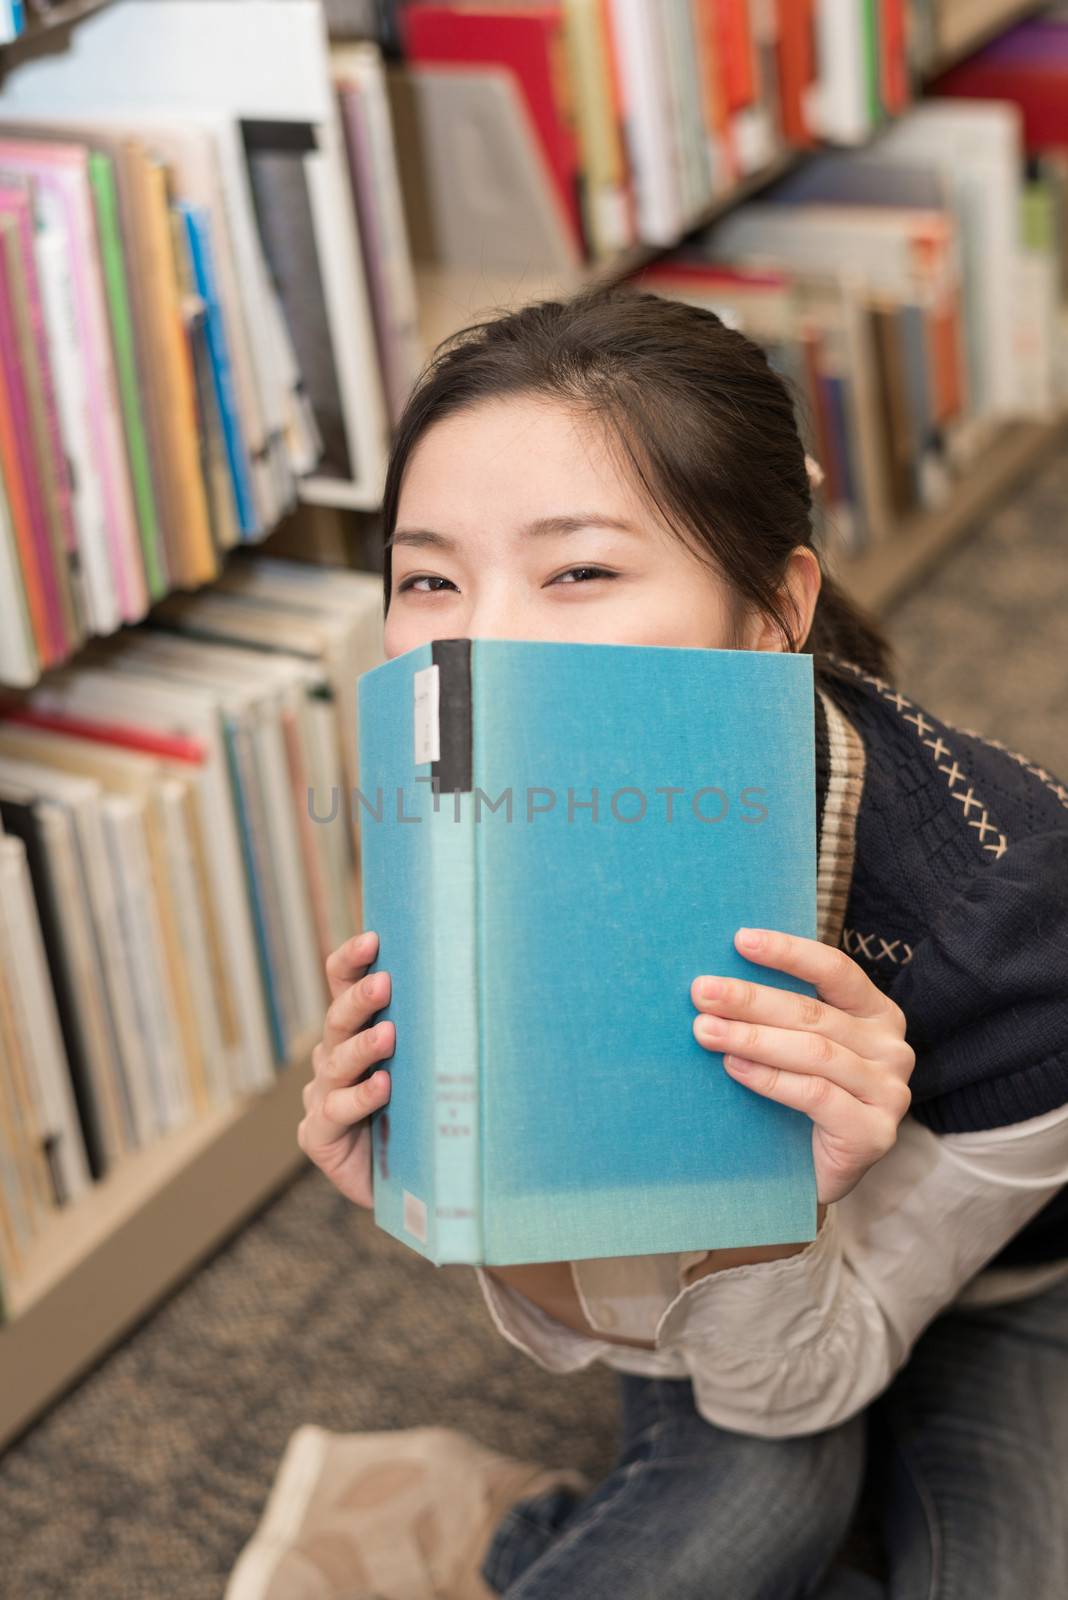 Playful student covering mouth with a blue hard cover book in library